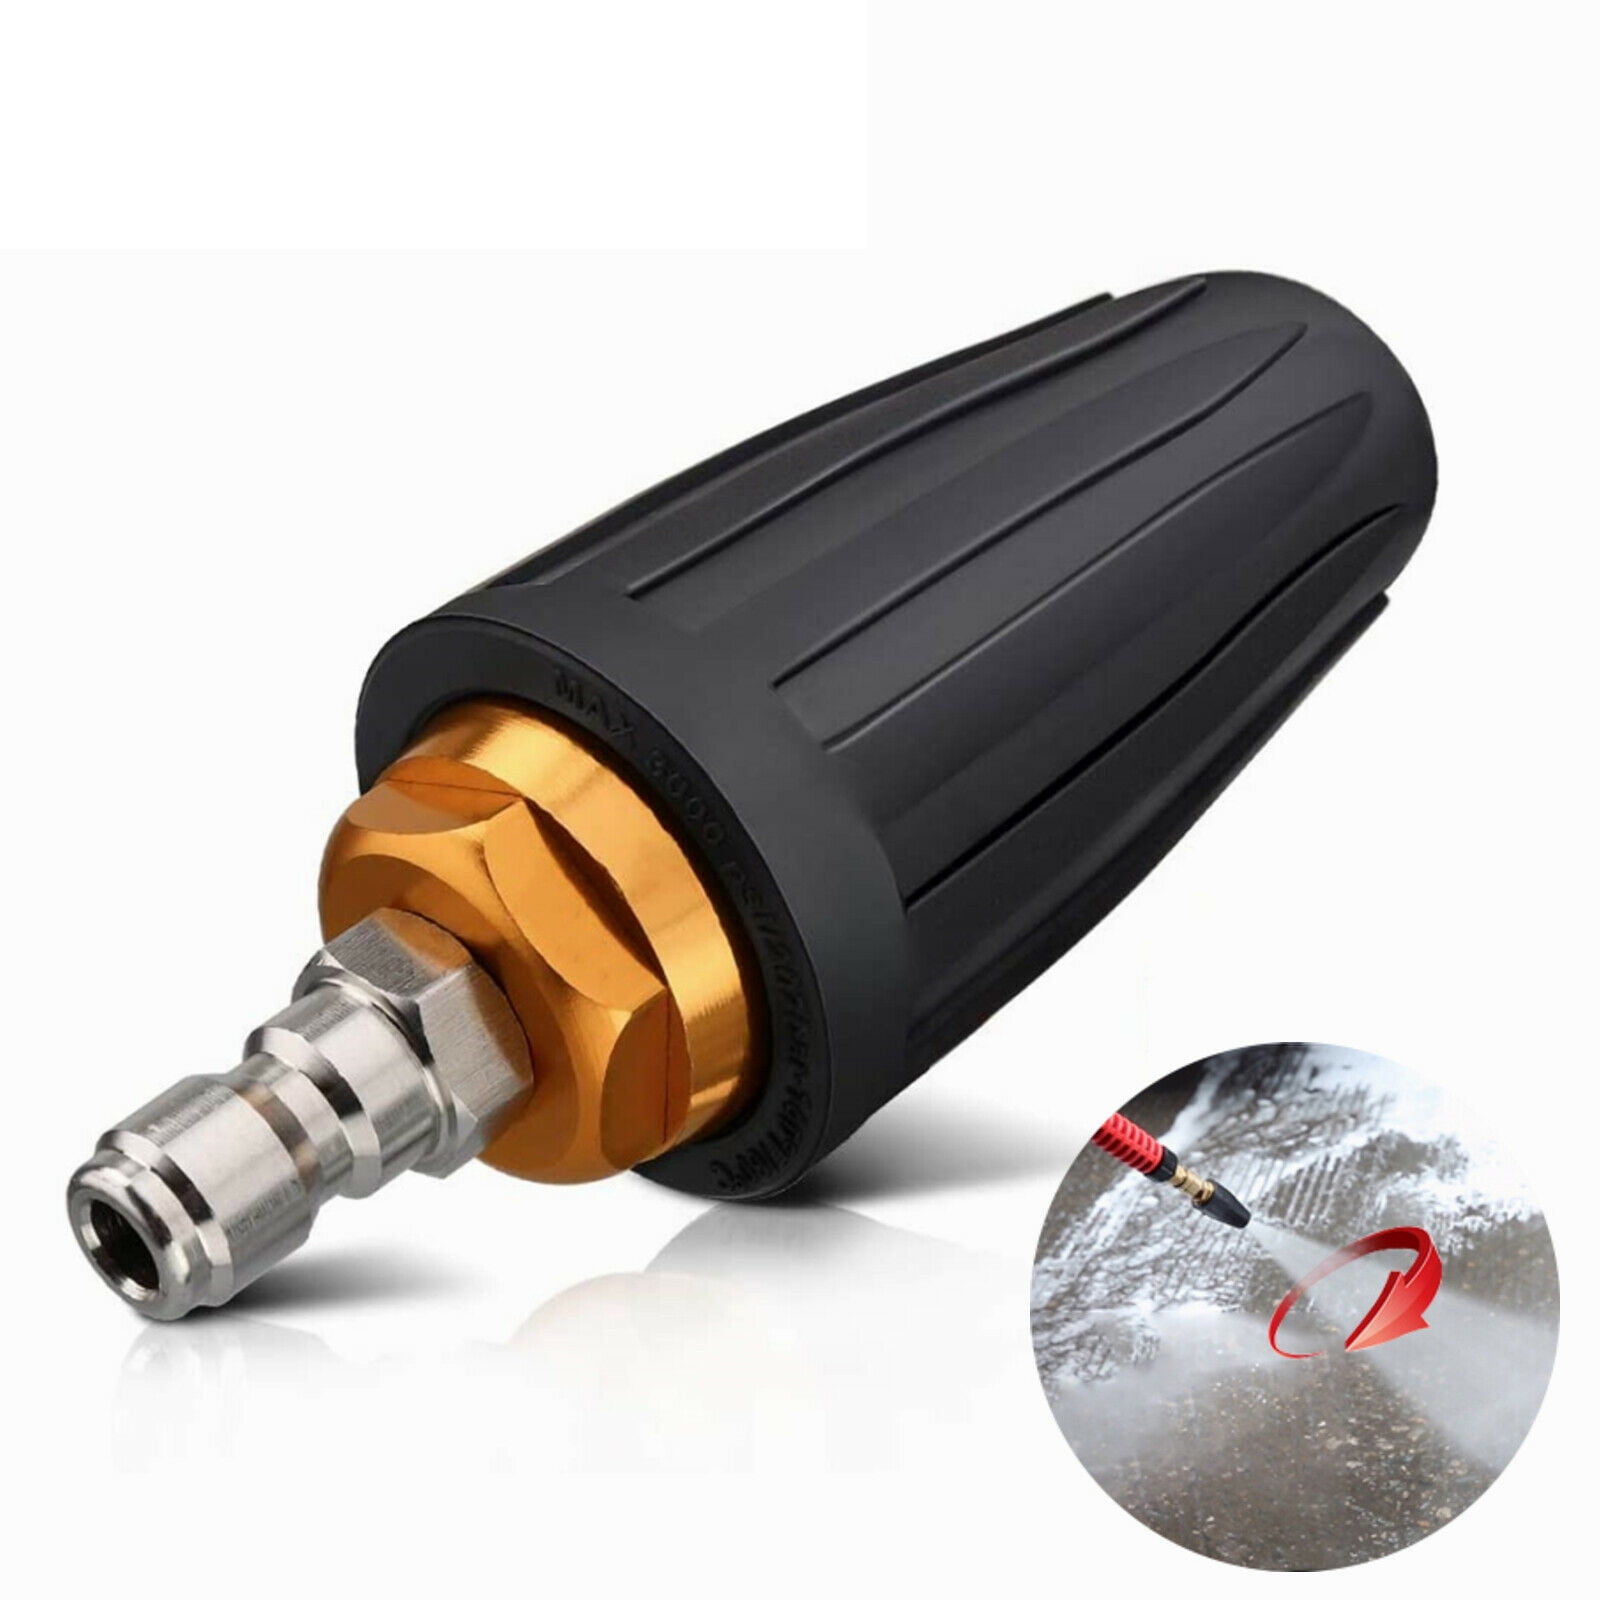 4000psi 1/4"  Quick Connect Pressure Washer Rotating Turbo Nozzle Spray Tip Q9Y1 